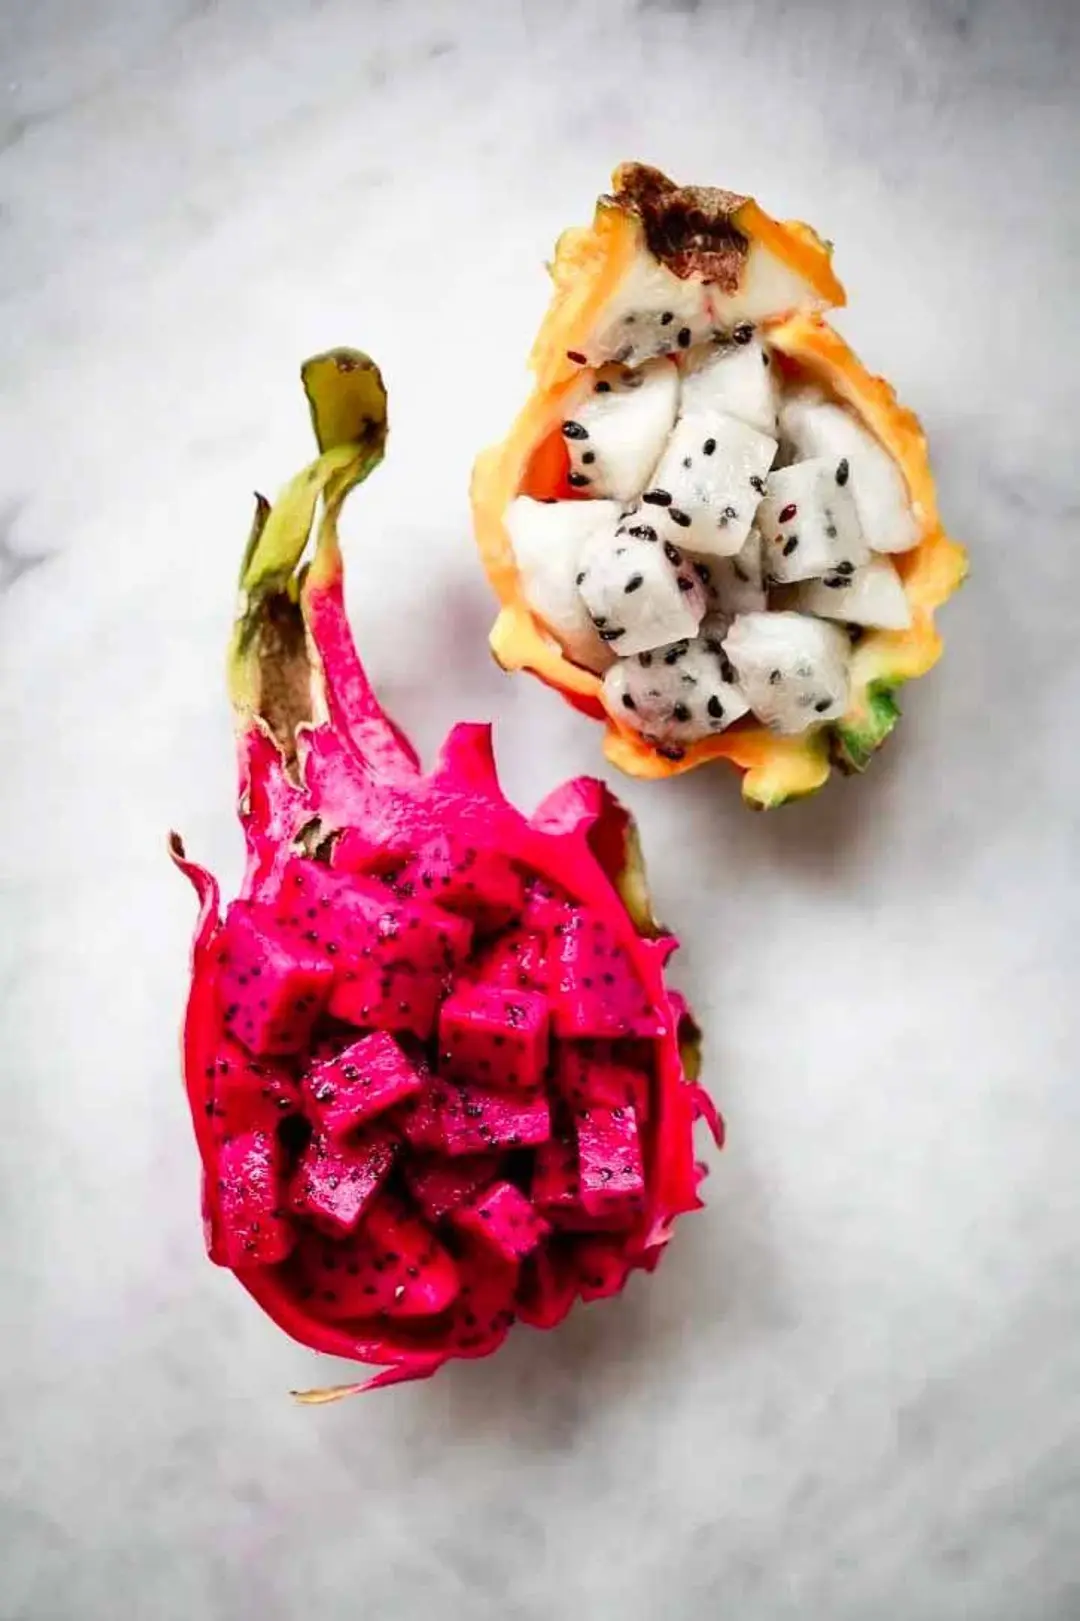 How to Cut Dragon Fruit